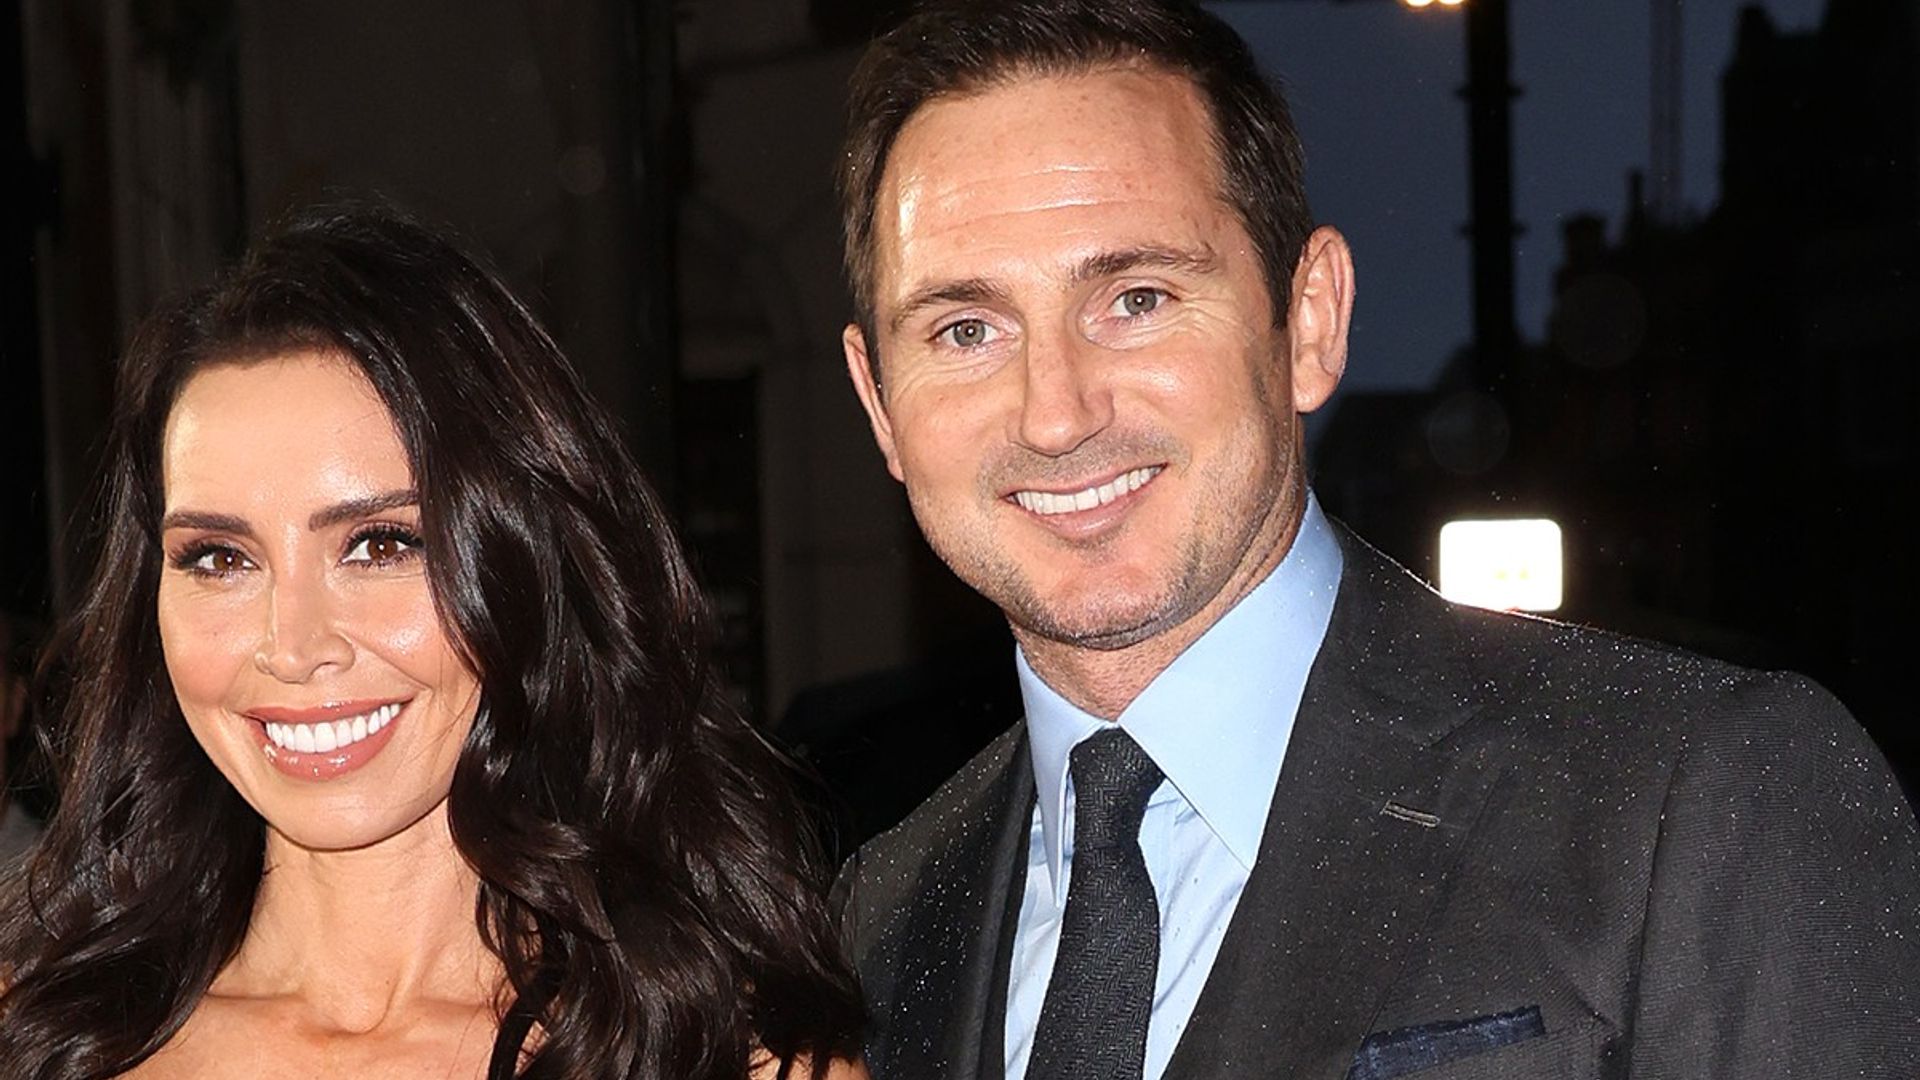 Christine Lampard and husband Frank pictured for first time after shock firing